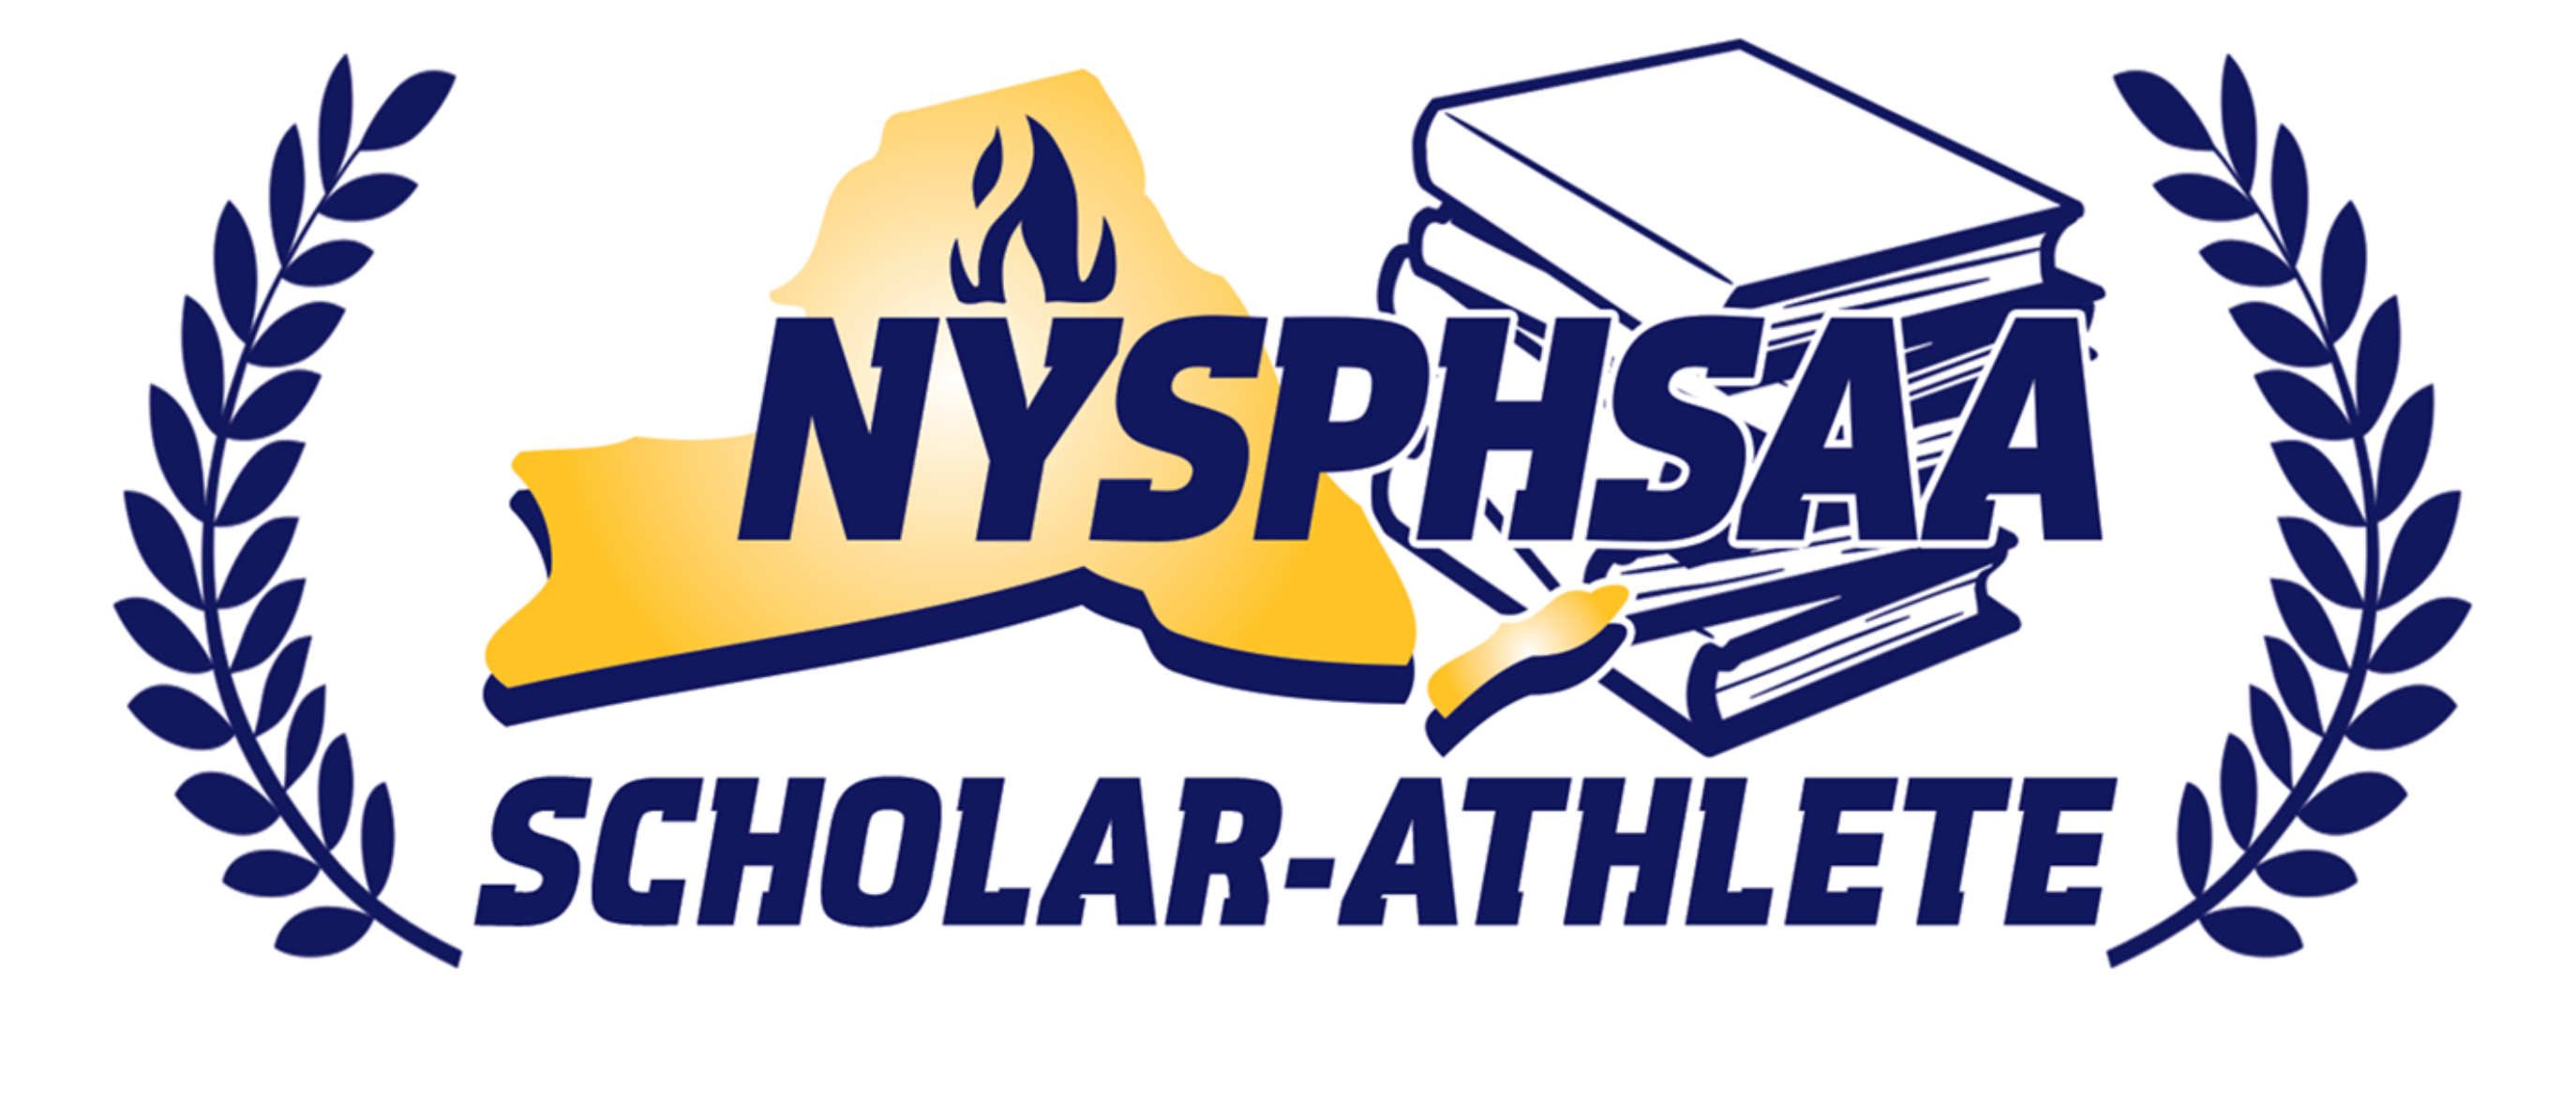 Congratulations to Albion High School for being awarded the prestigious NYSPHSAA 2022-2023 Schools of Excellence!